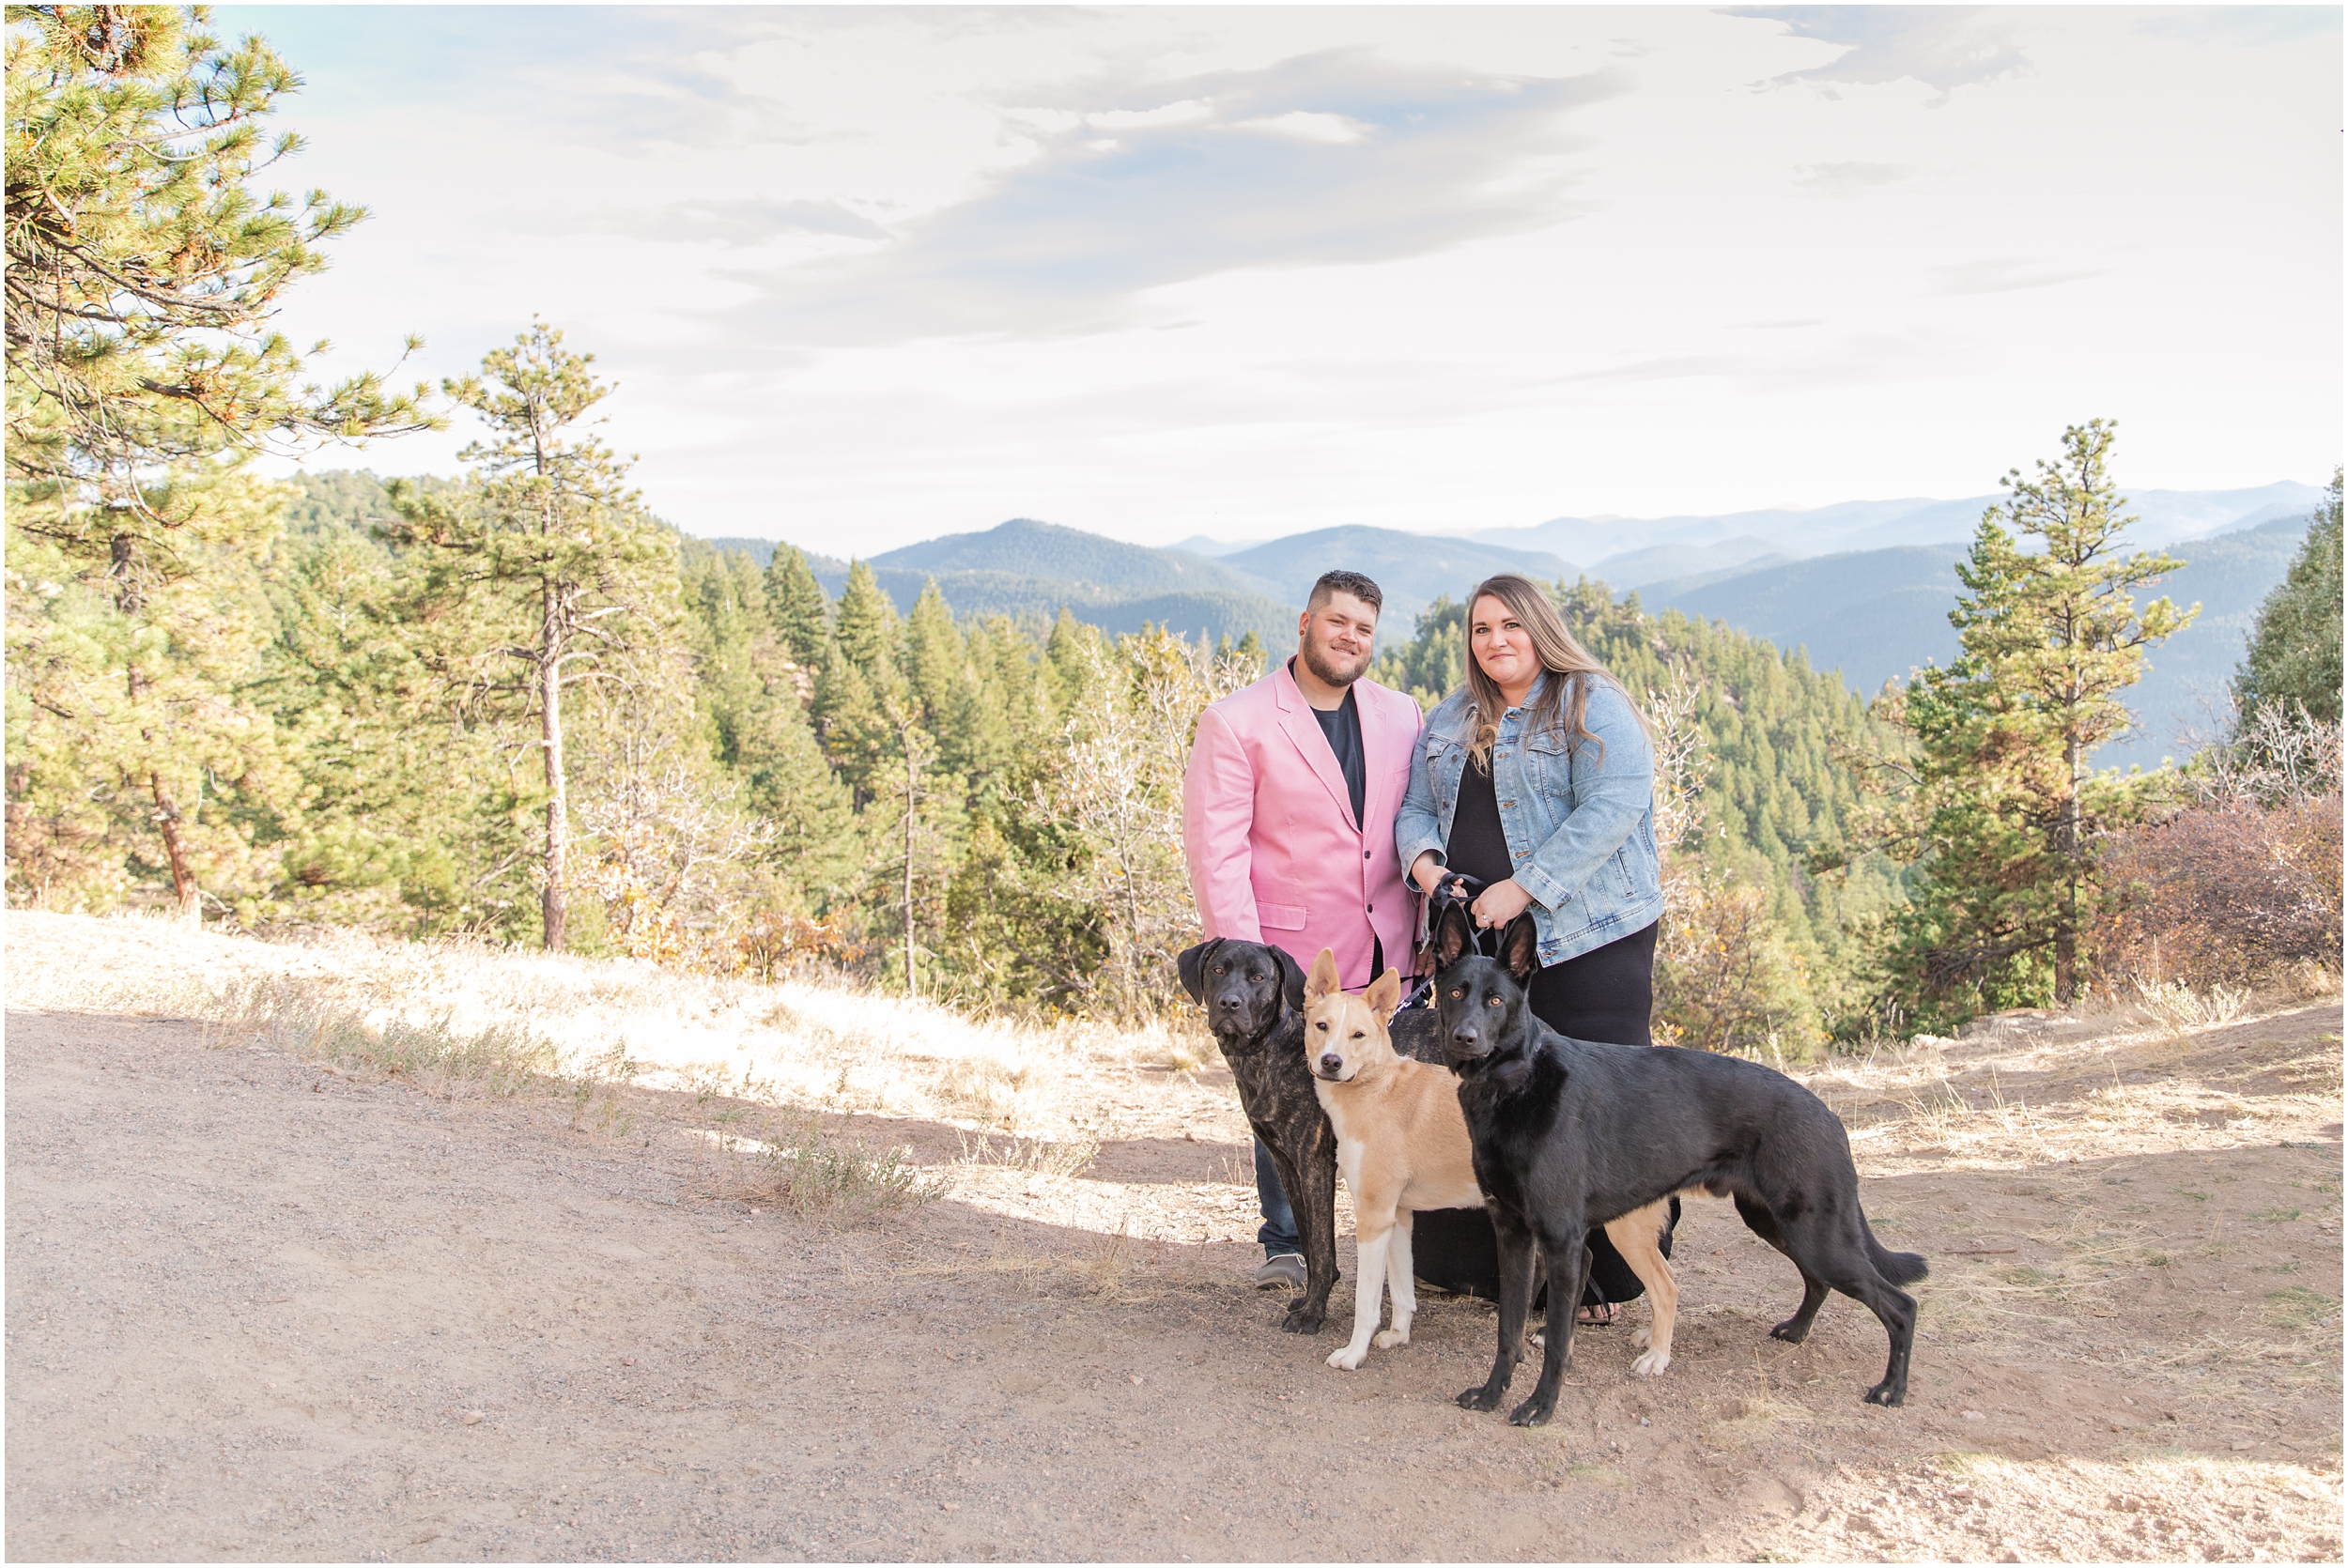 Colorado Fall Engagement Session Mt Falcon West and Mt Falcon East